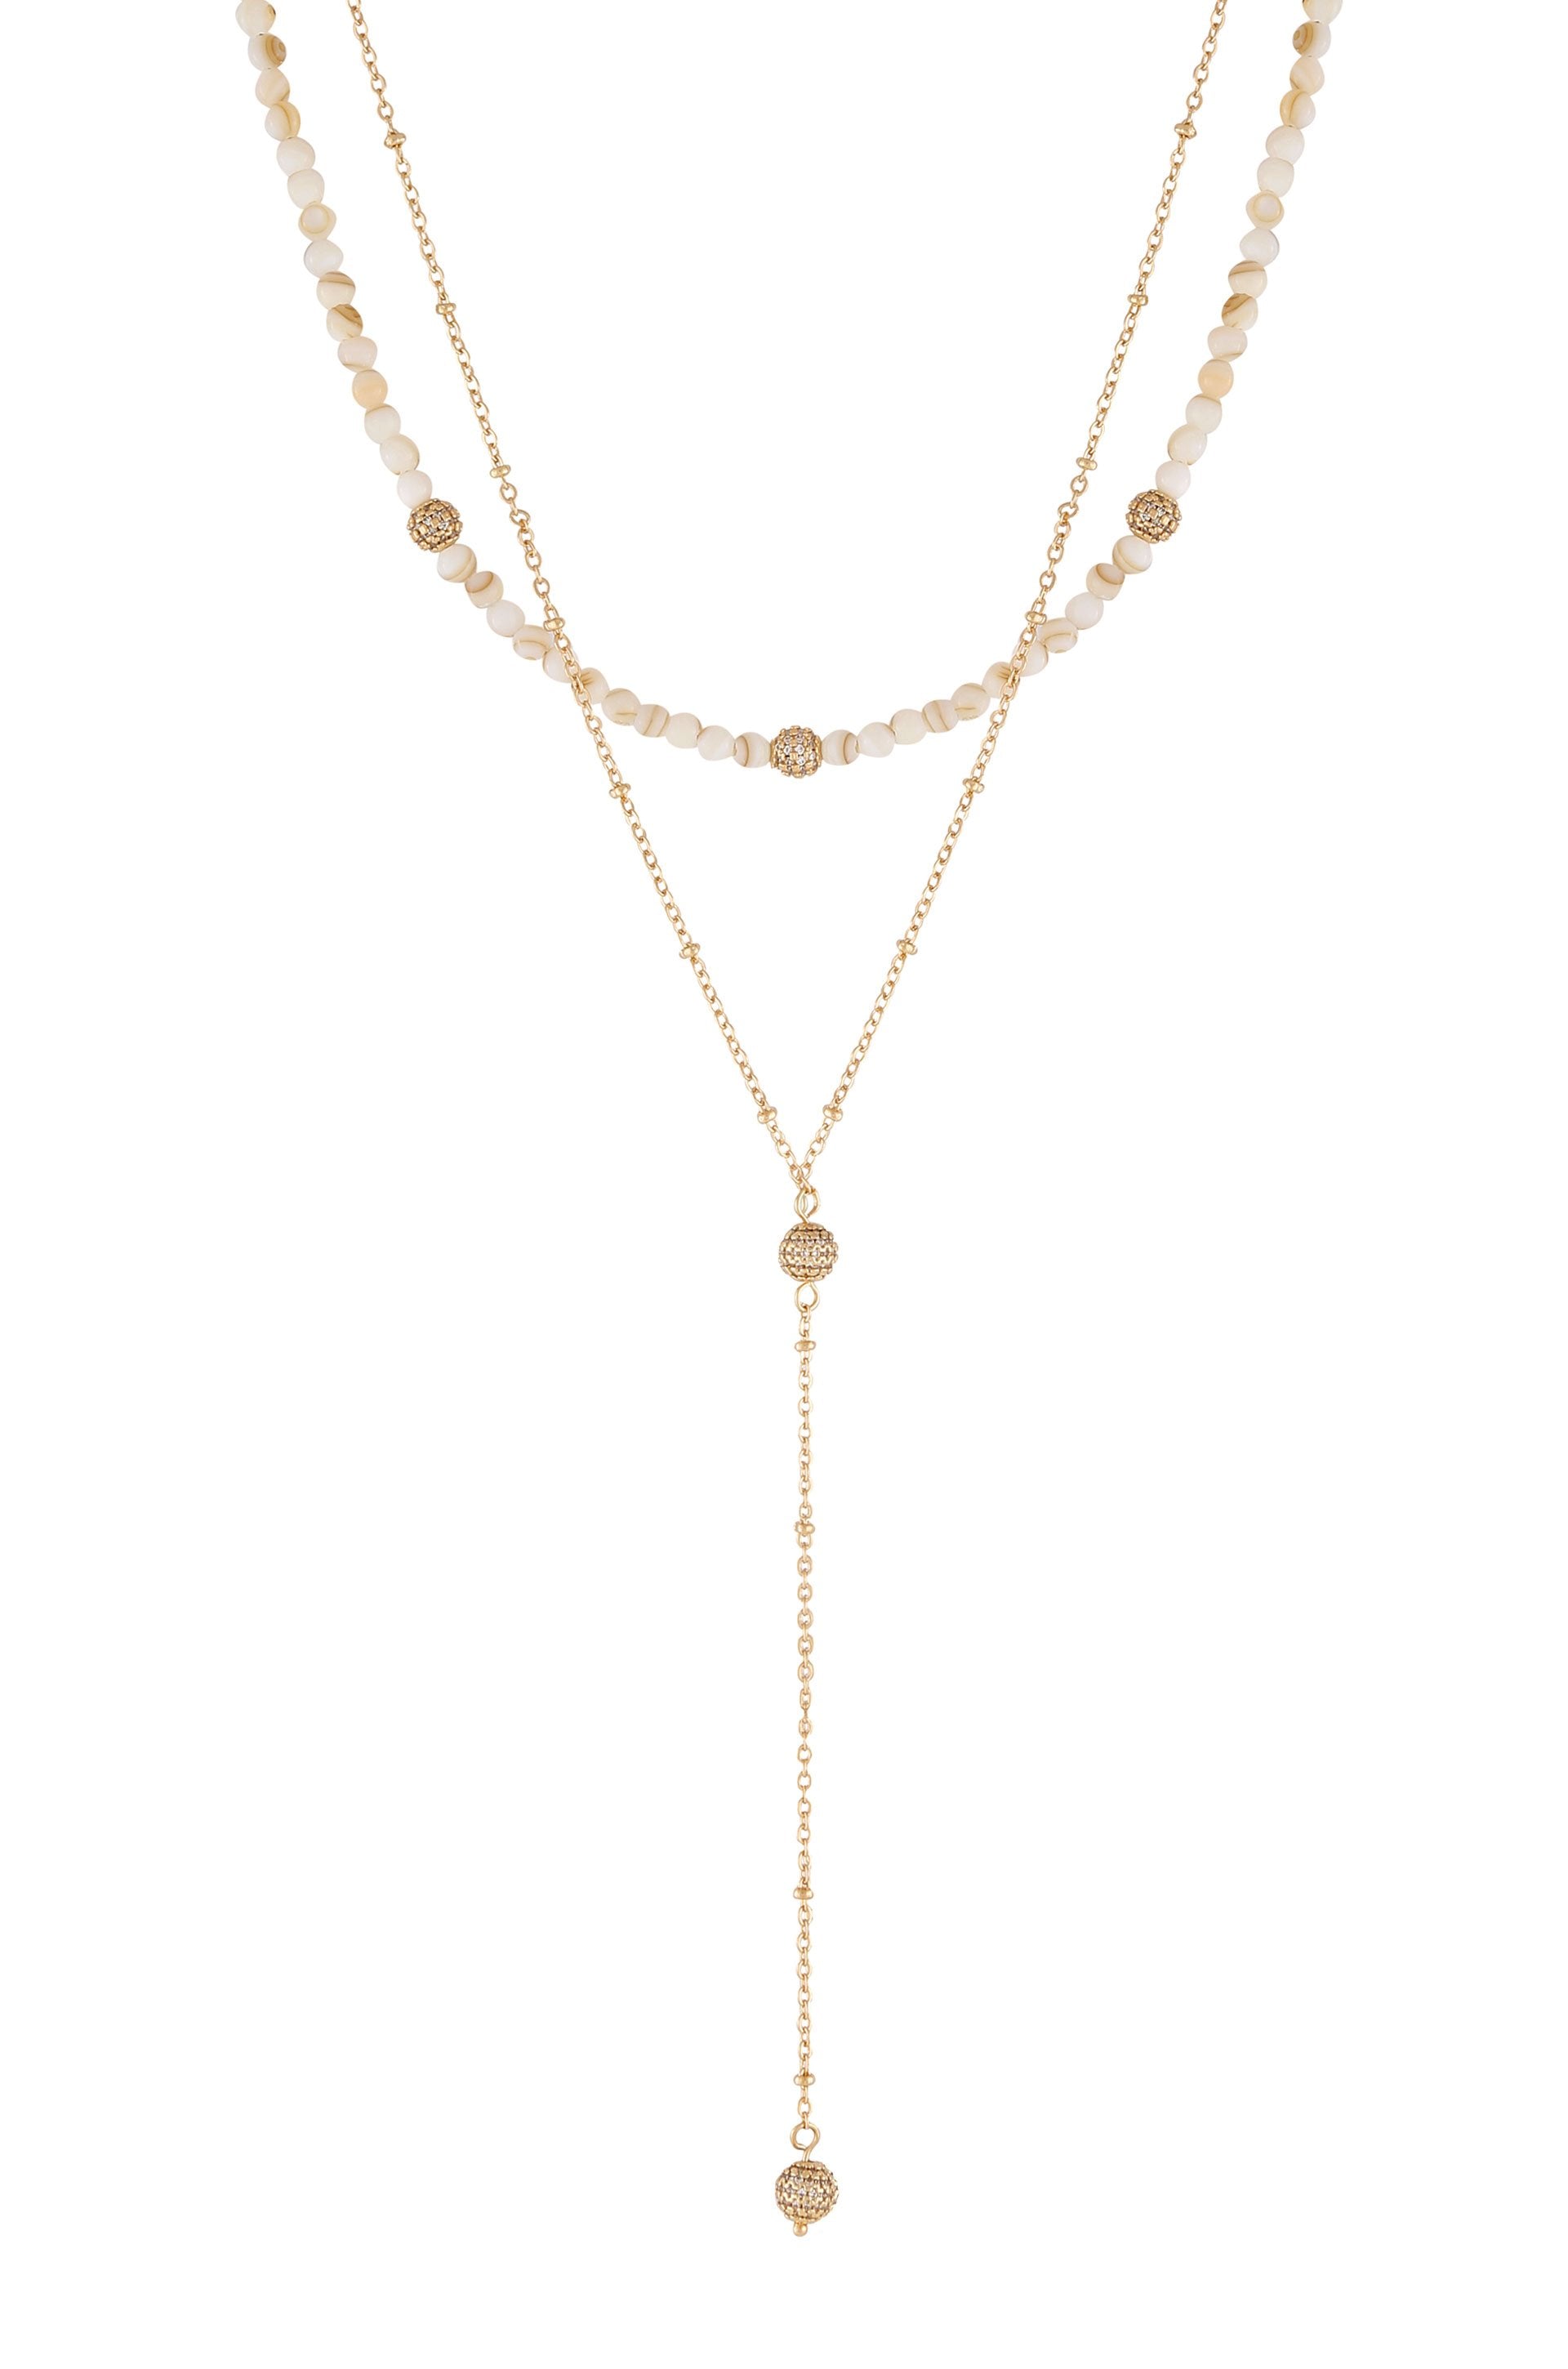 Shell Bead and Crystal Lariat 18k Gold Plated Necklace Set on white background  2